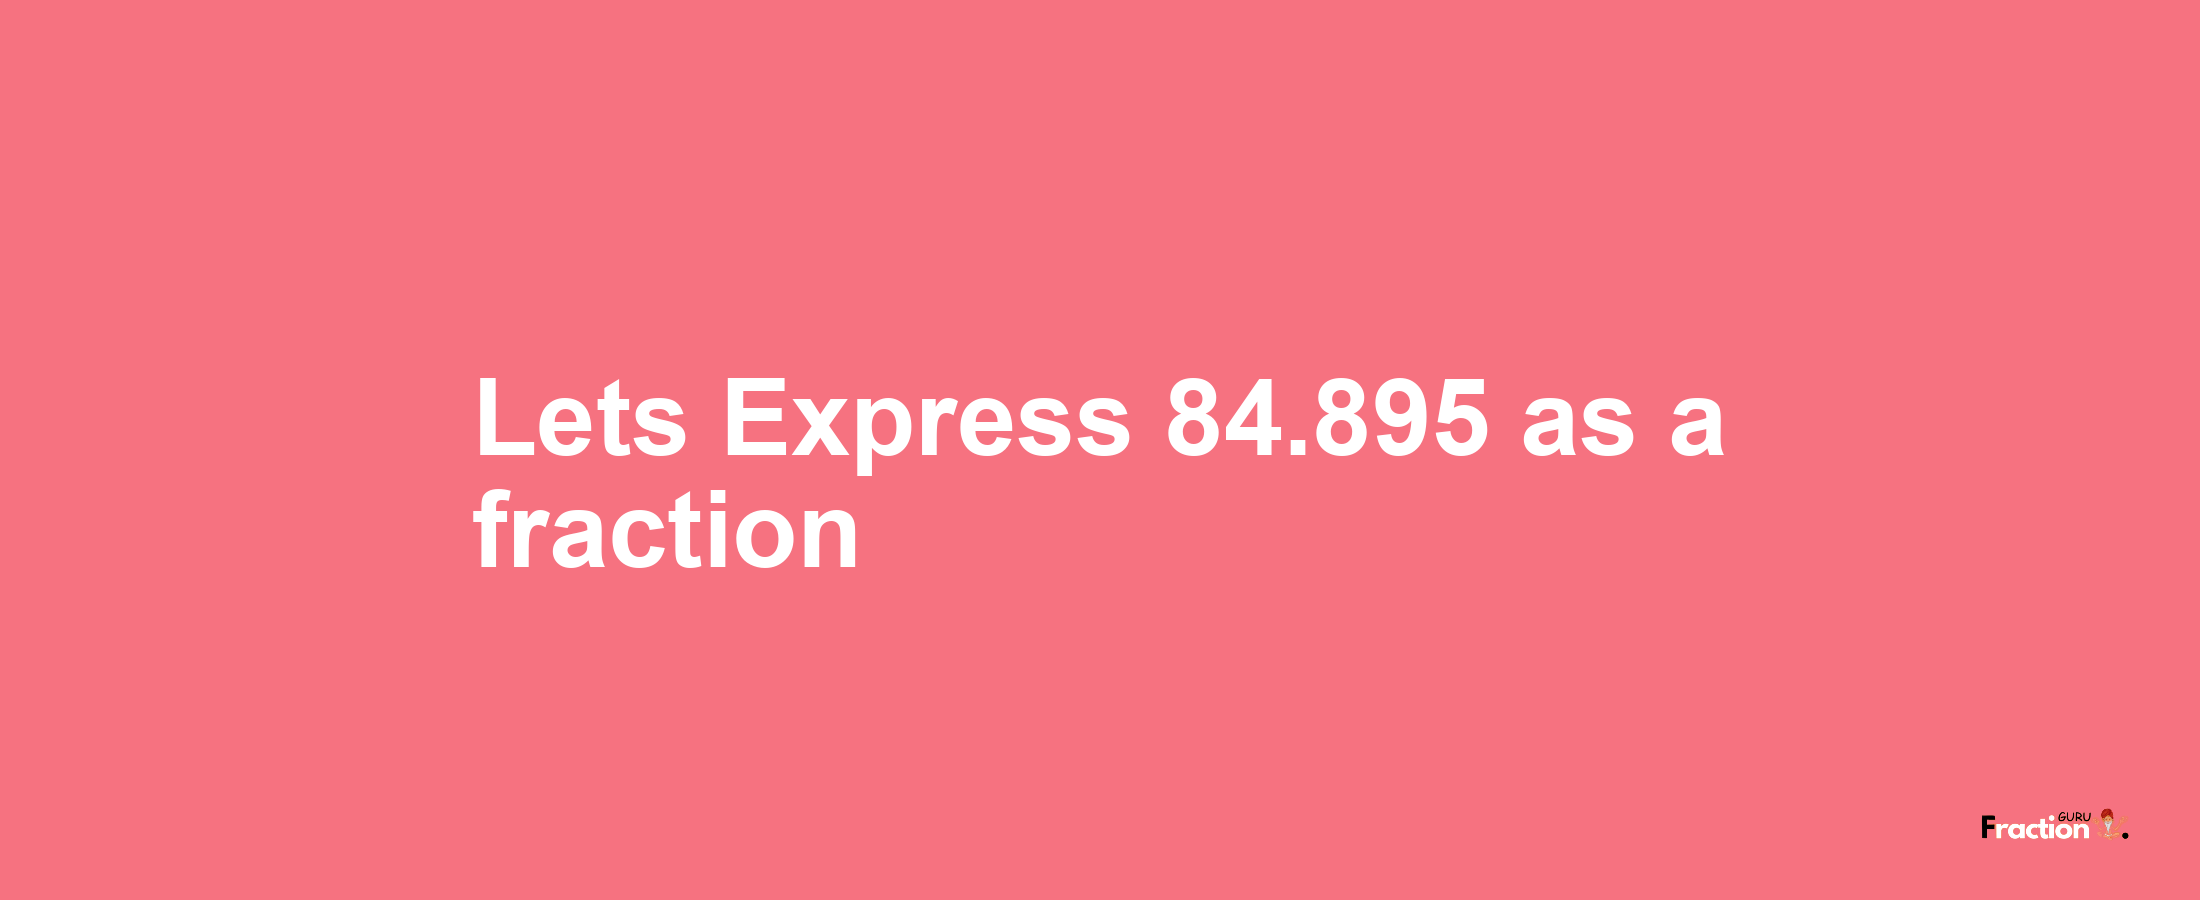 Lets Express 84.895 as afraction